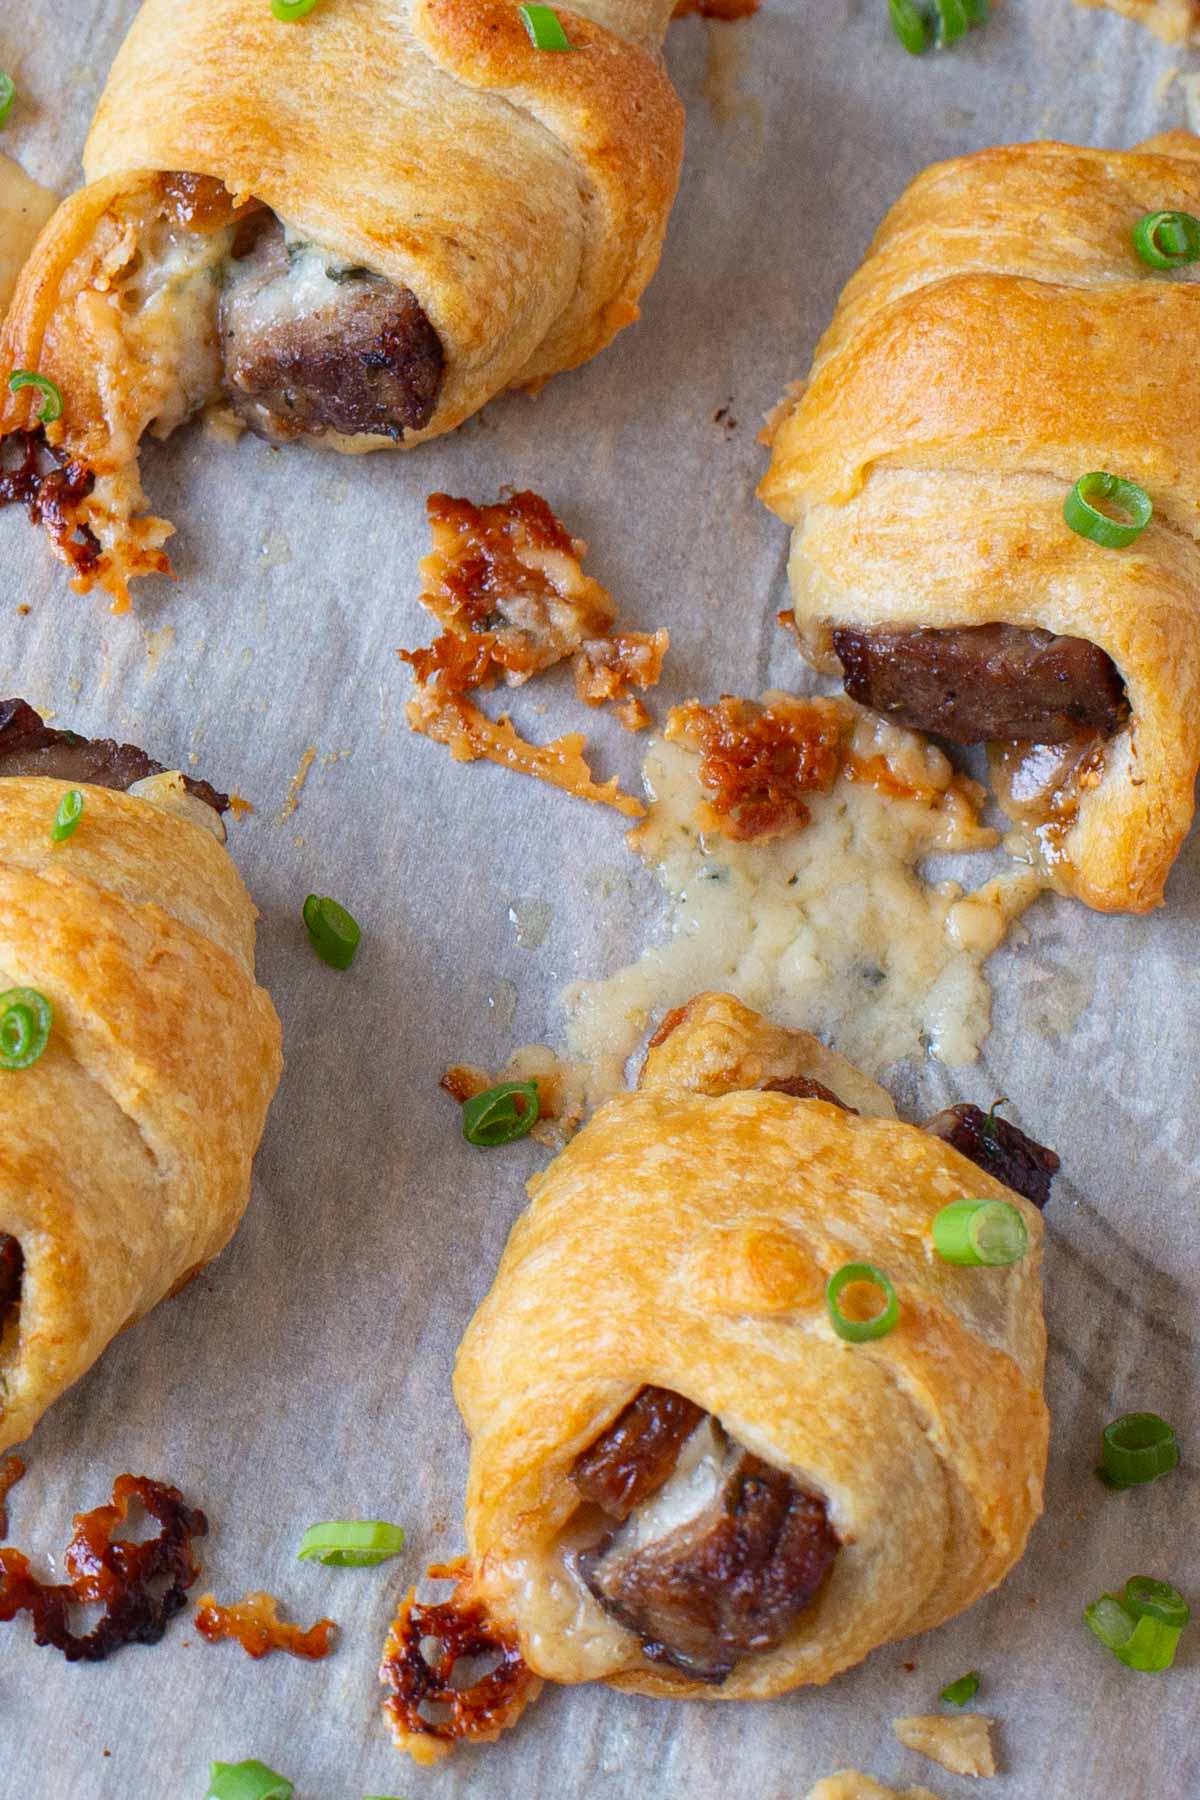 Appetizers of steak and blue cheese wrapped in crescent rolls.